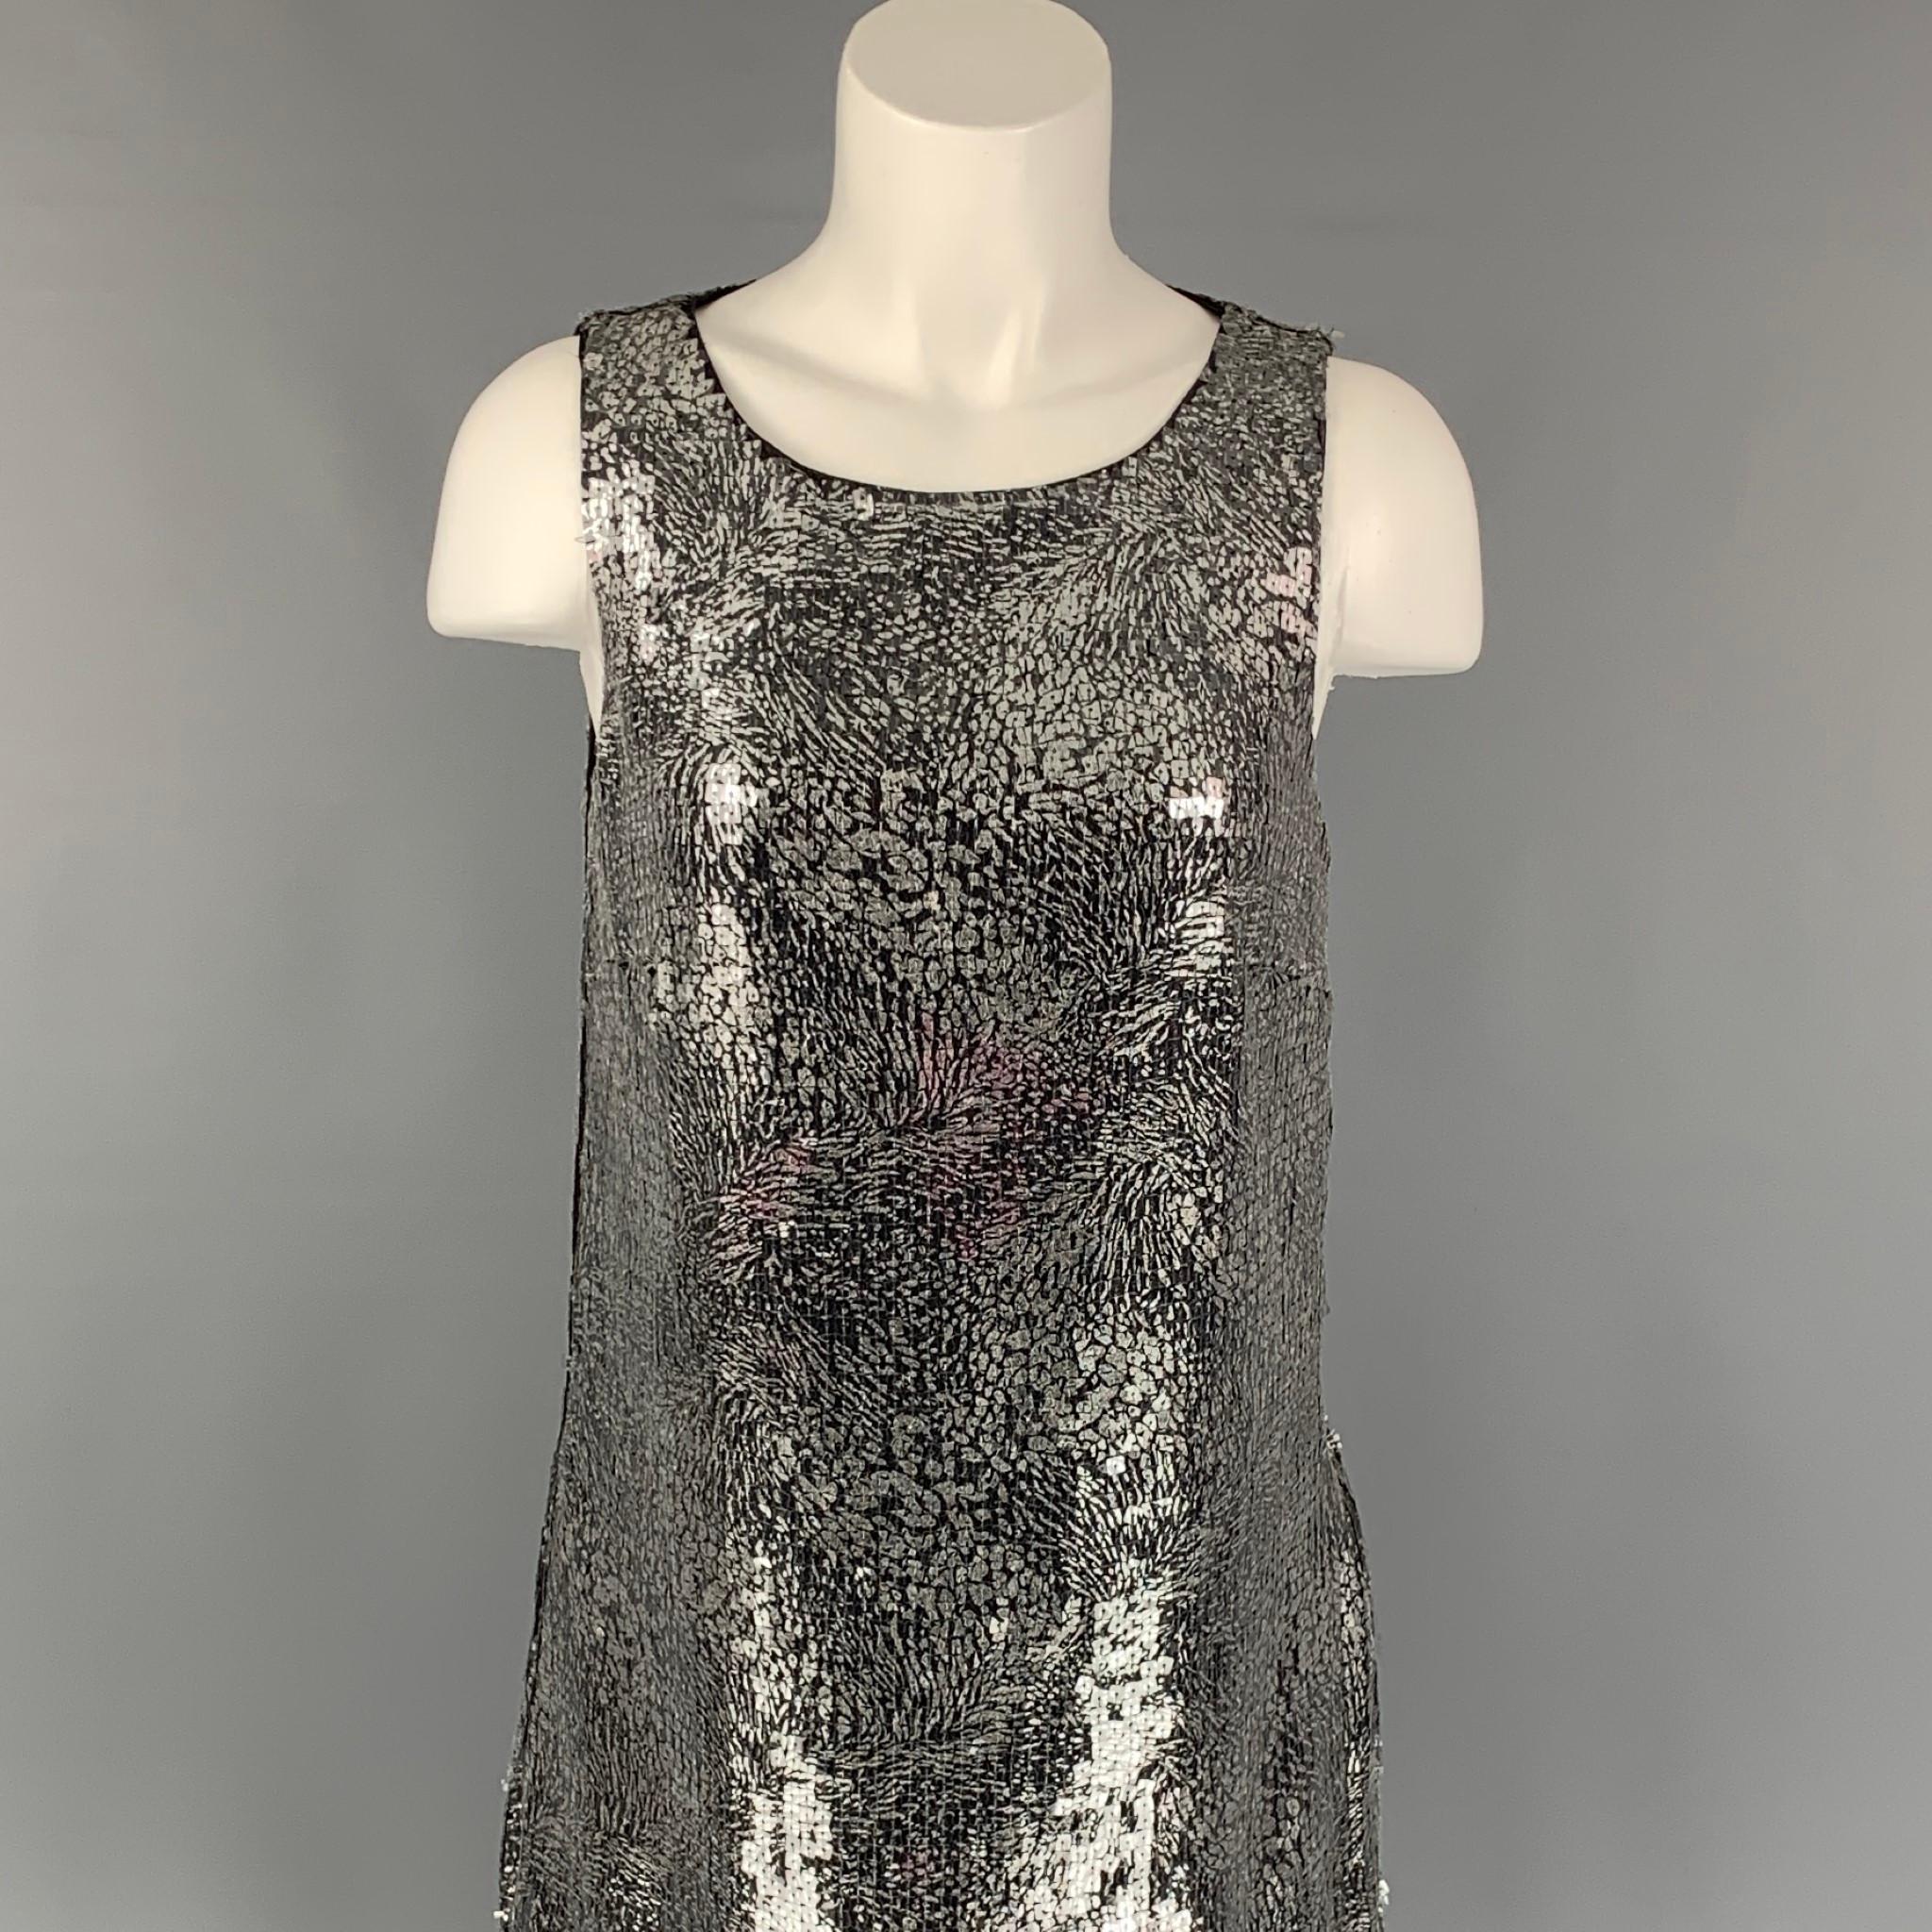 BADGLEY MISCHKA COLLECTION dress comes in a silver & black sequined polyester featuring a shift style, ostrich feather trim, sleeveless, and a side zipper closure. 

Very Good Pre-Owned Condition. Fabric tag removed. Light discoloration at